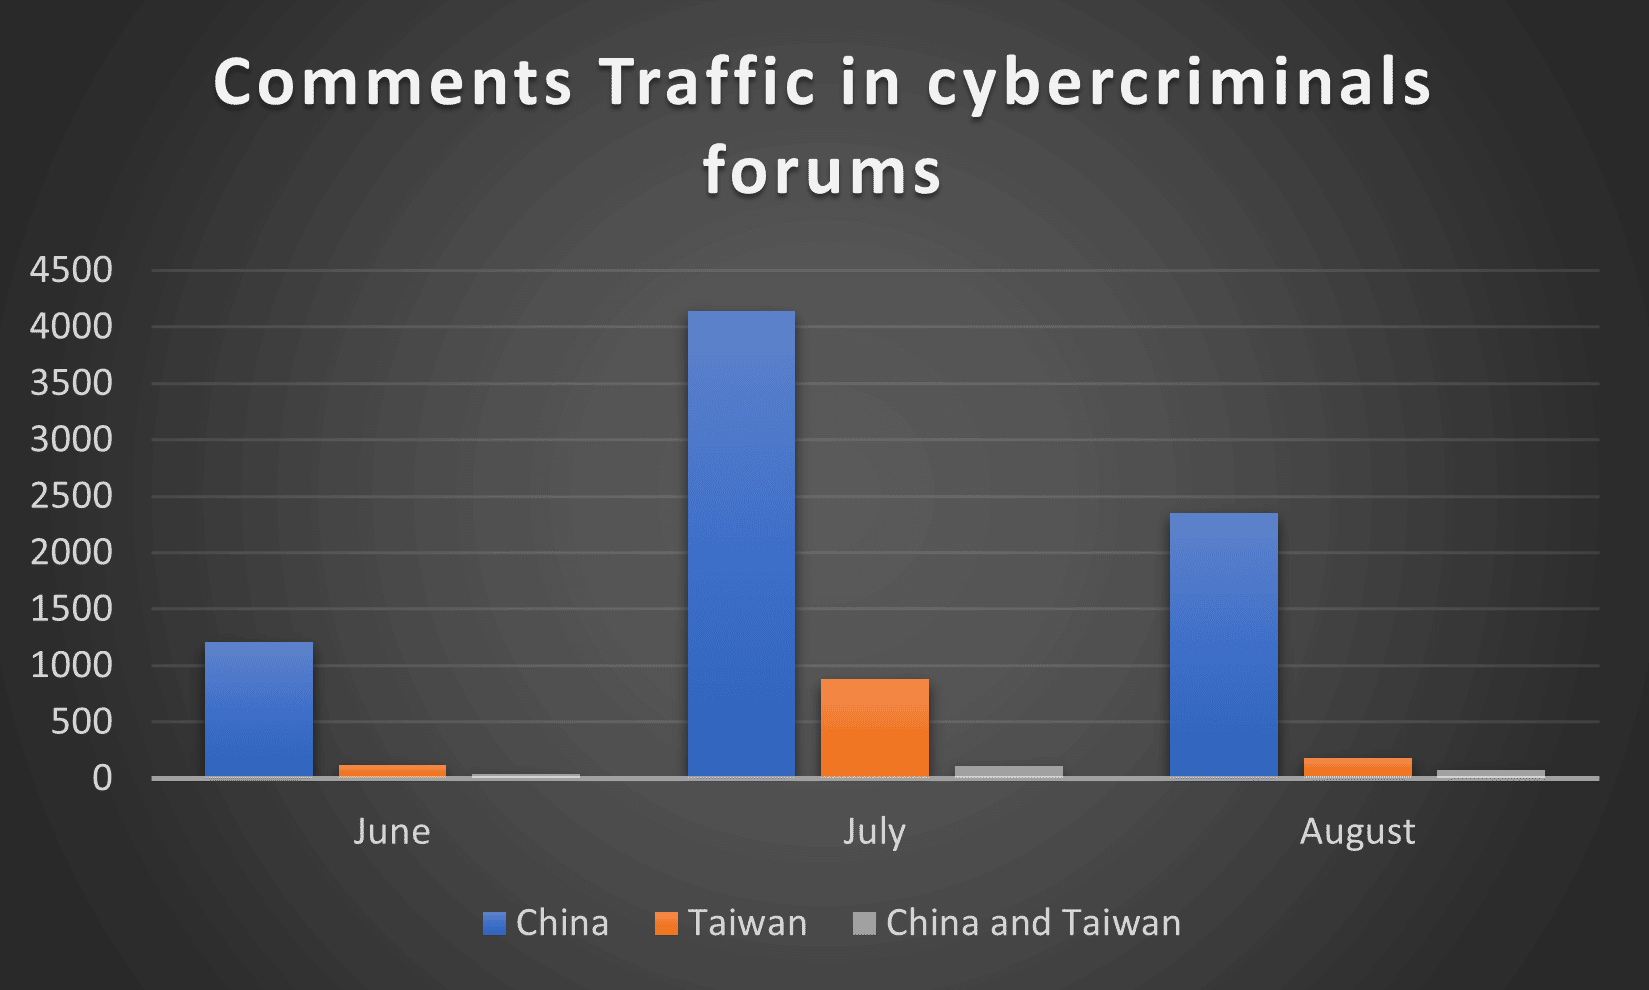 China-related comments – a major increase in traffic